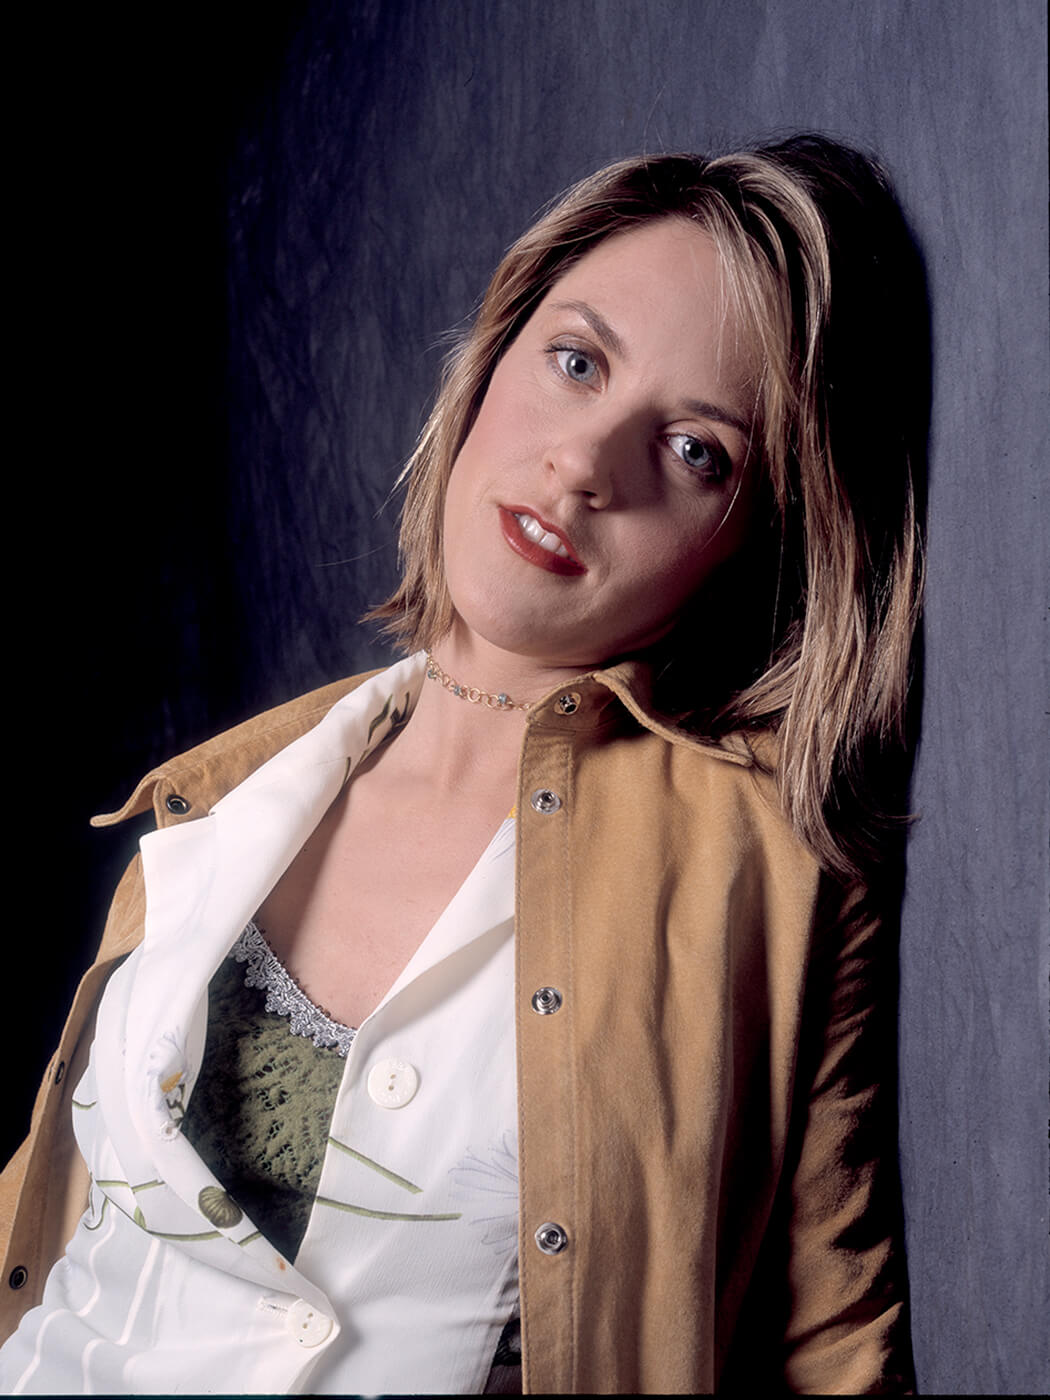 Liz Phair, 1998, by Paul Natkin/Getty Images